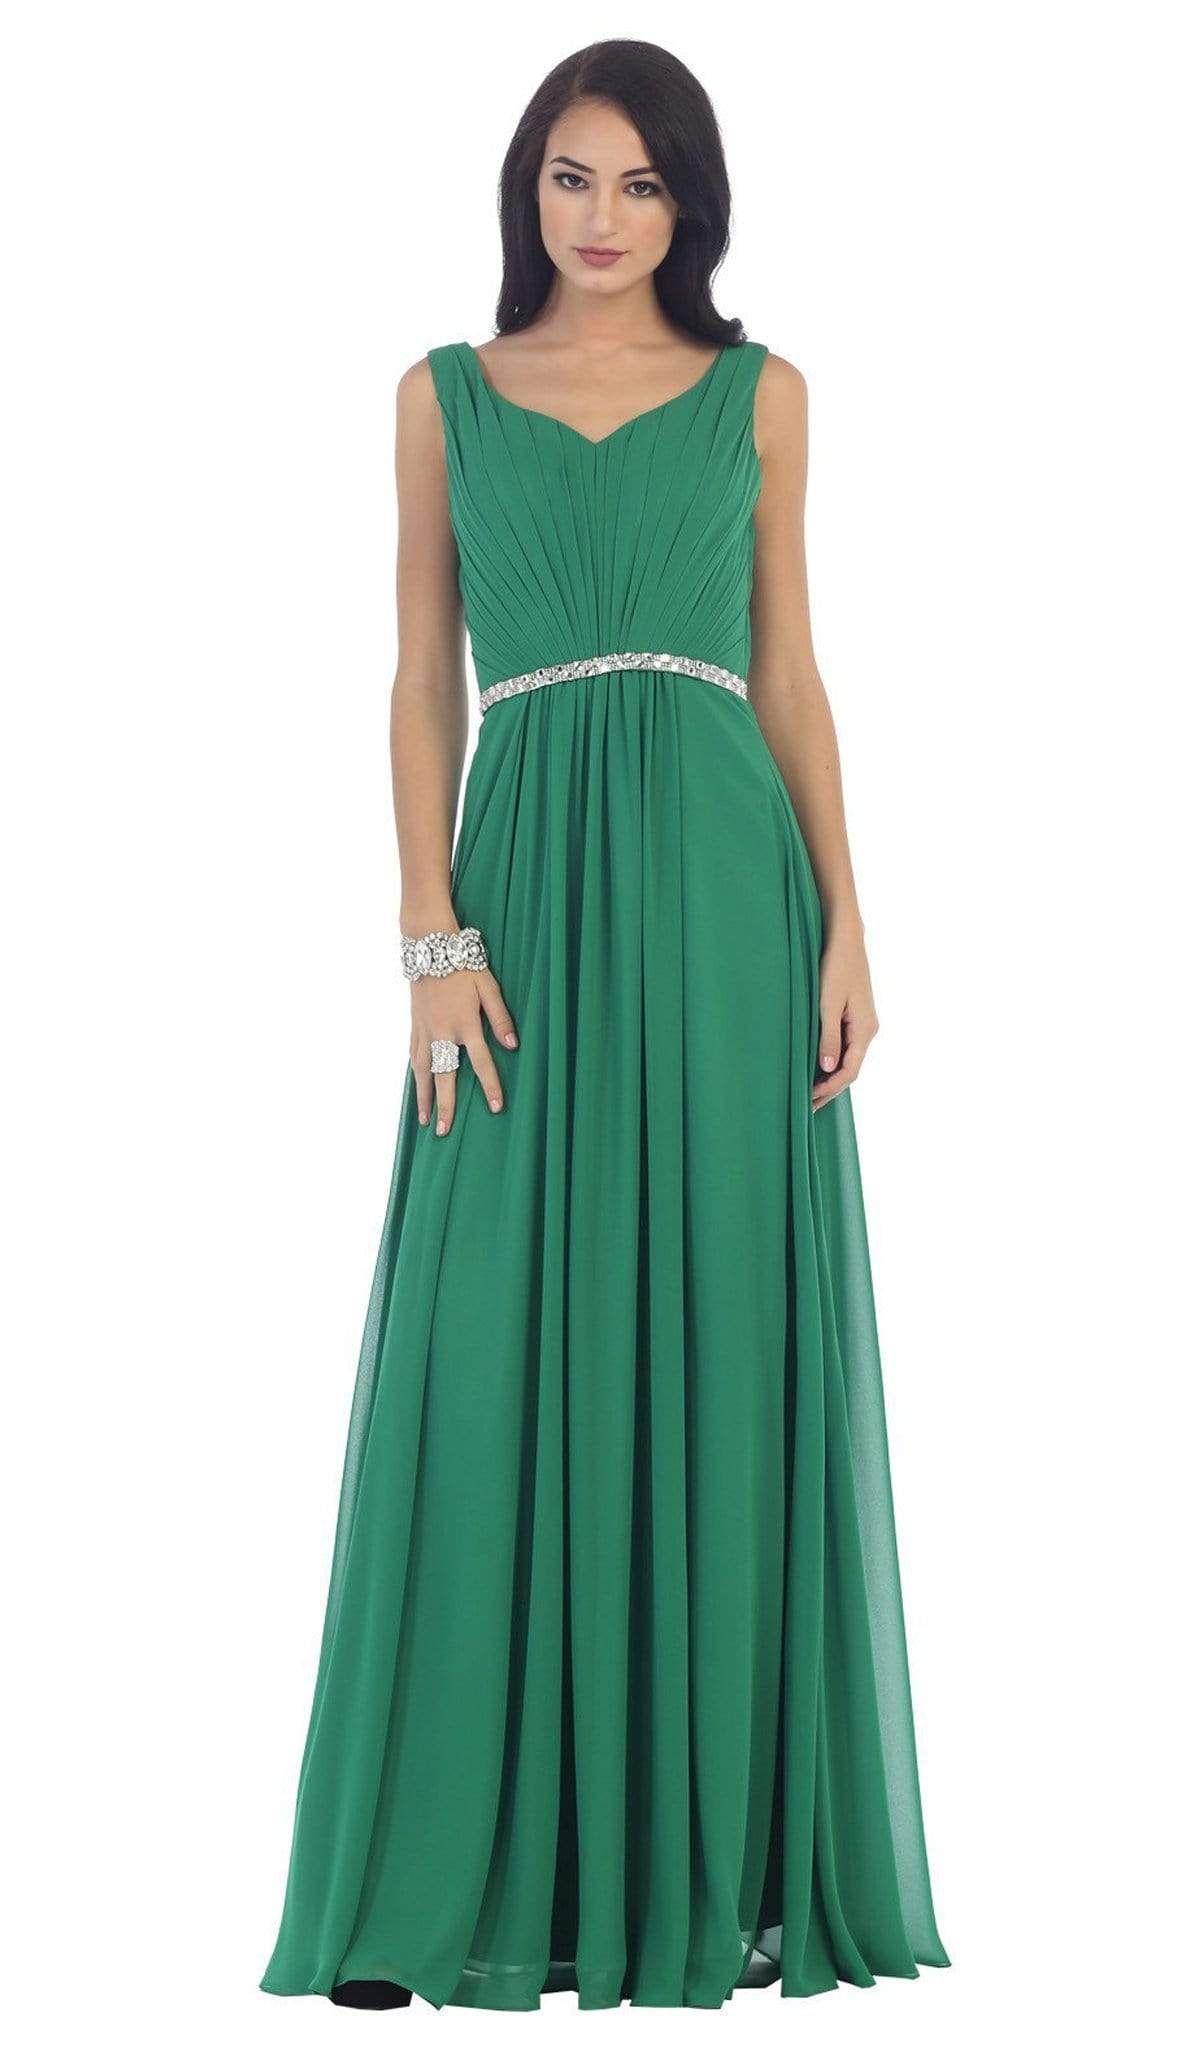 May Queen - Jeweled V-Neck Chiffon A-Line Prom Dress Special Occasion Dress 22 / Emerald Green